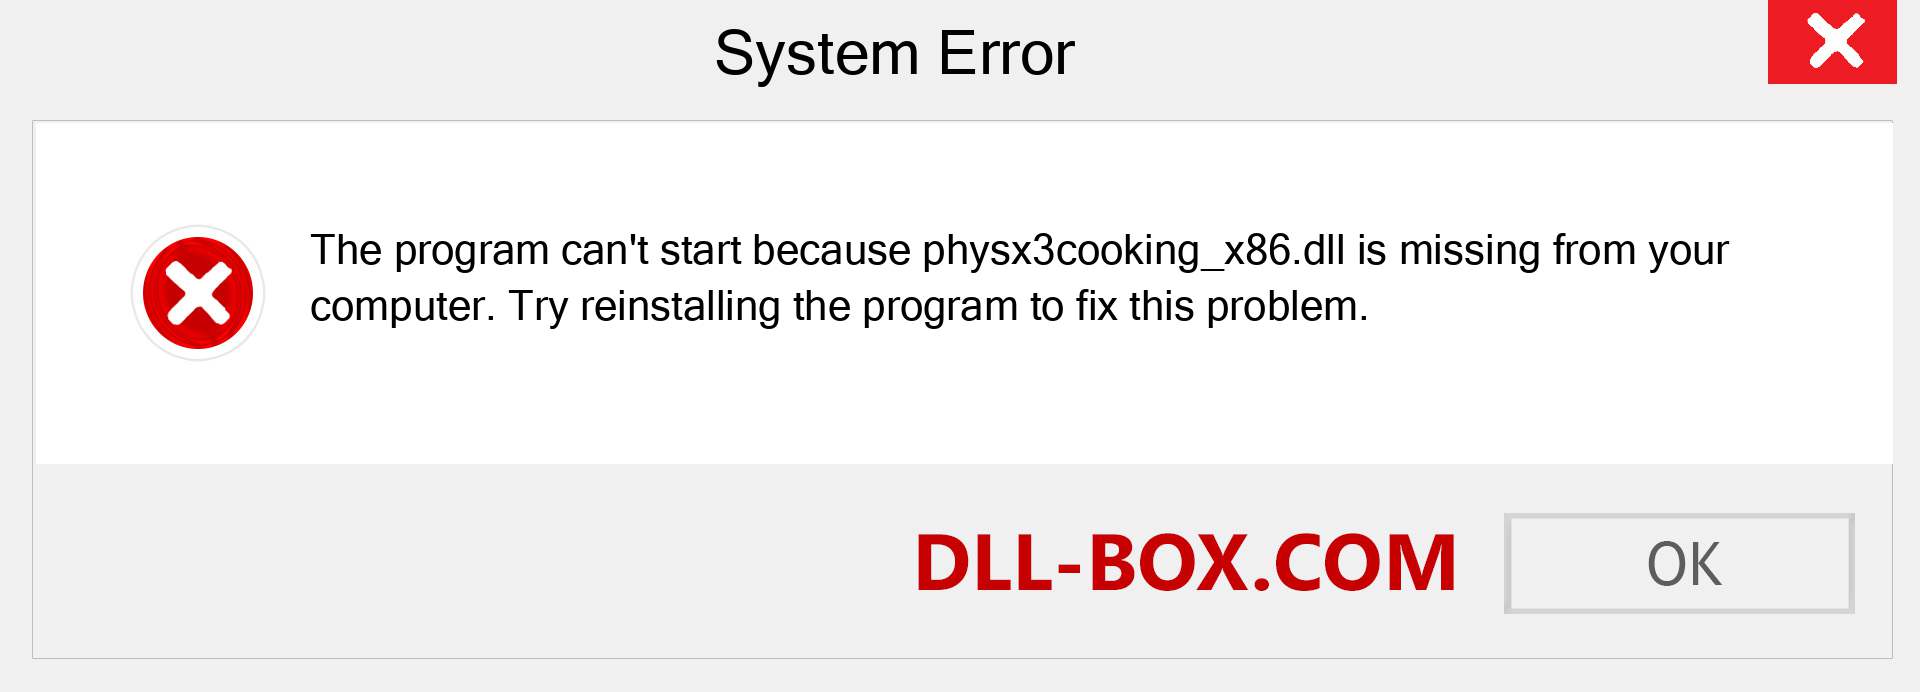  physx3cooking_x86.dll file is missing?. Download for Windows 7, 8, 10 - Fix  physx3cooking_x86 dll Missing Error on Windows, photos, images